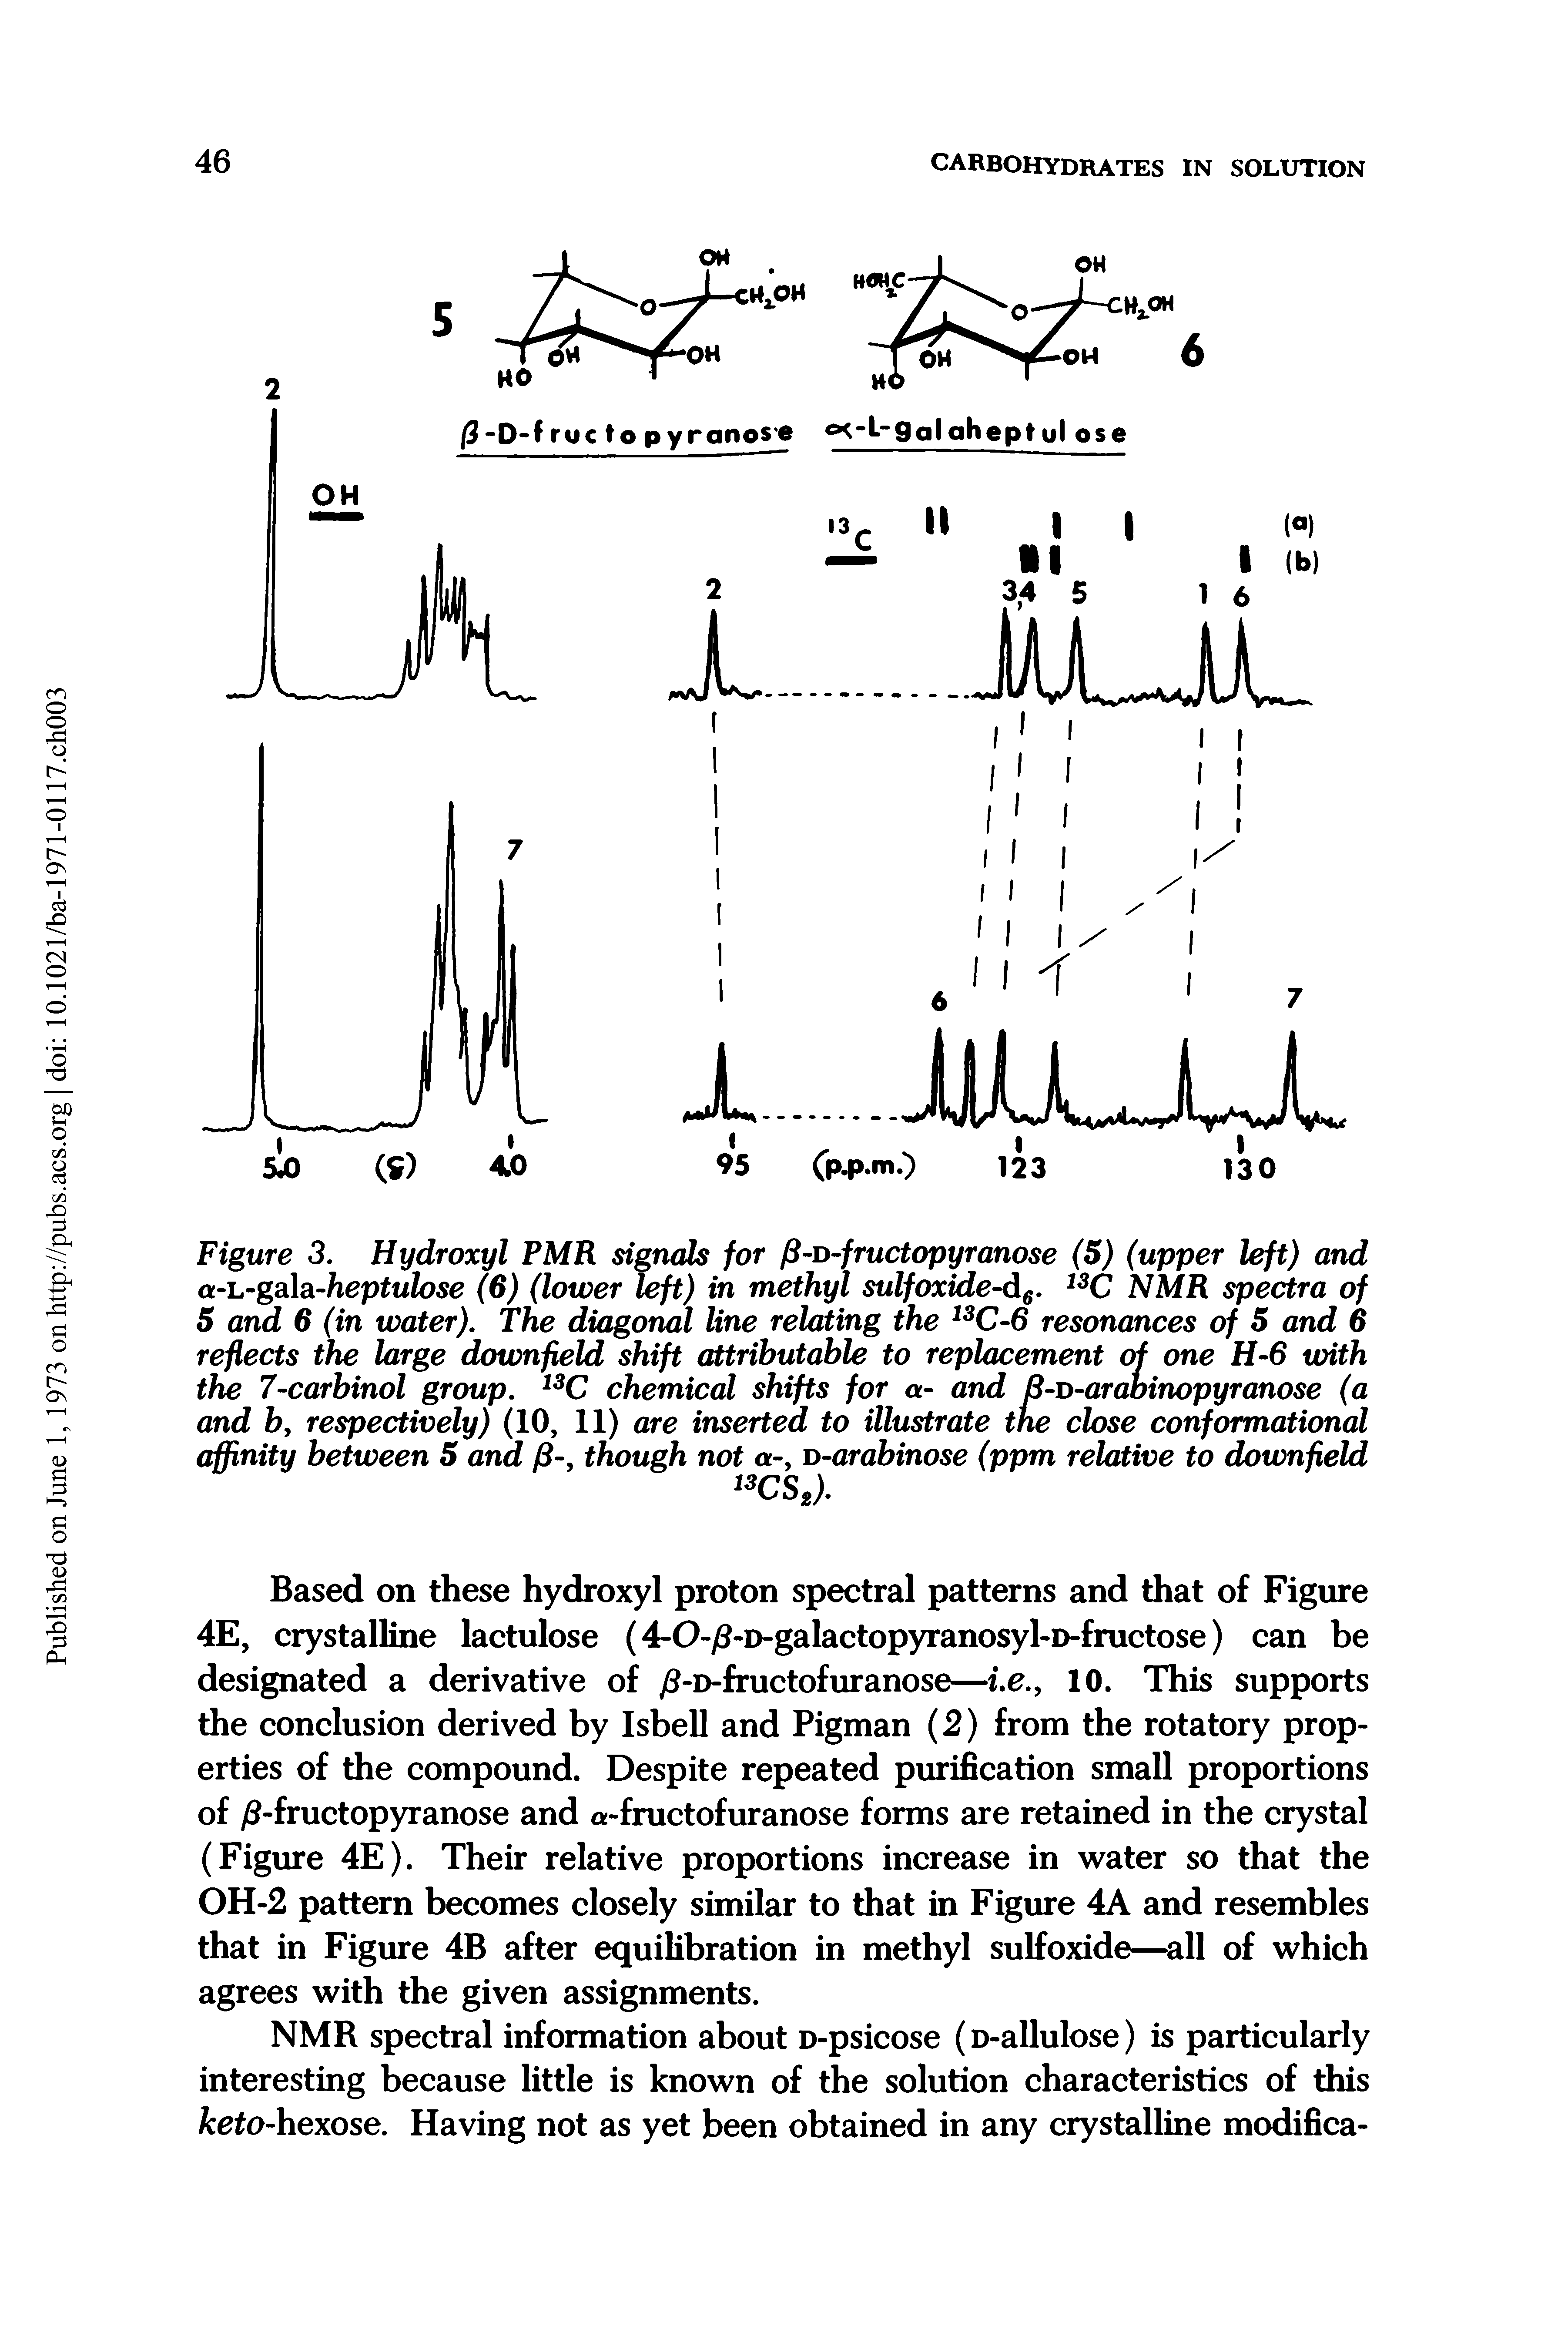 Figure 3. Hydroxyl PMR signals for p-o-fructopyranose (5) (upper left) and ct-L-gala-heptulose (6) (lower left) in methyl sulfoxide-dtf. 13C NMR spectra of 5 and 6 (in water). The diagonal line relating the 13C-6 resonances of 5 and 6 reflects the large downfield shift attributable to replacement of one H-6 with the 7-carbinol group. 13C chemical shifts for a- and B-o-arabinopyranose (a and b, respectively) (10, 11) are inserted to illustrate the close conformational affinity between 5 and / -, though not a-, d-arabinose (ppm relative to downfield...